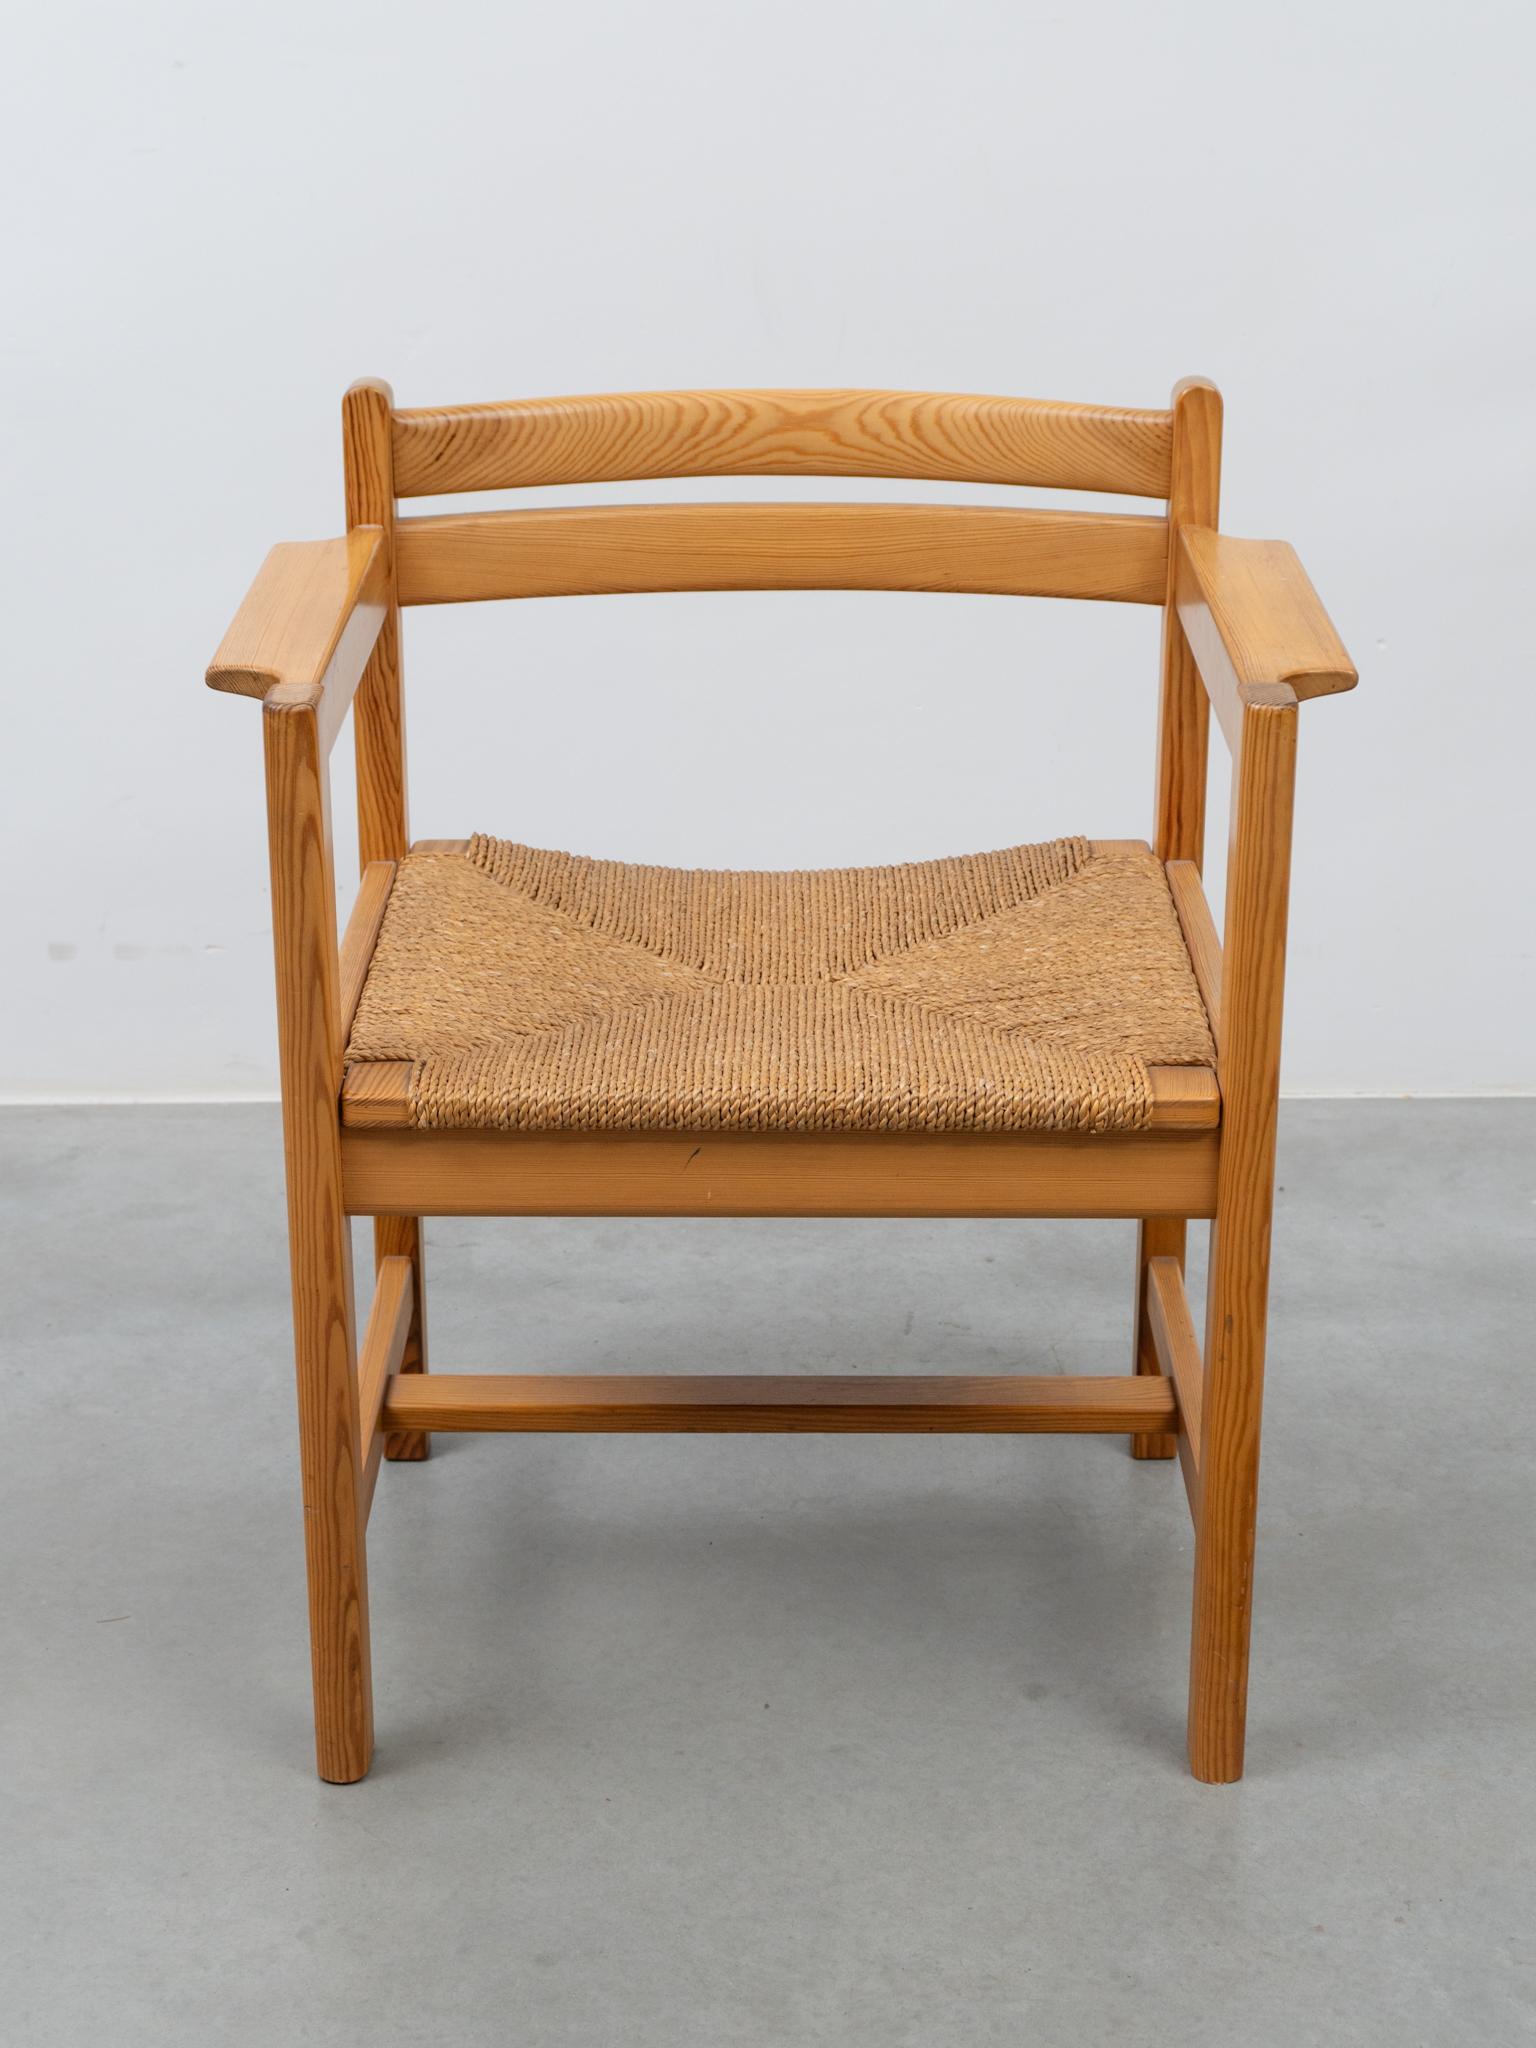 Eight pine and papercord ’Asserbo’ armchairs by Børge Mogensen for AB Karl Andersson & Söner, Sweden. The paper cord seat is original. Børge Mogensen designed his furniture with the idea that it should stand the test of time. These chairs are in a